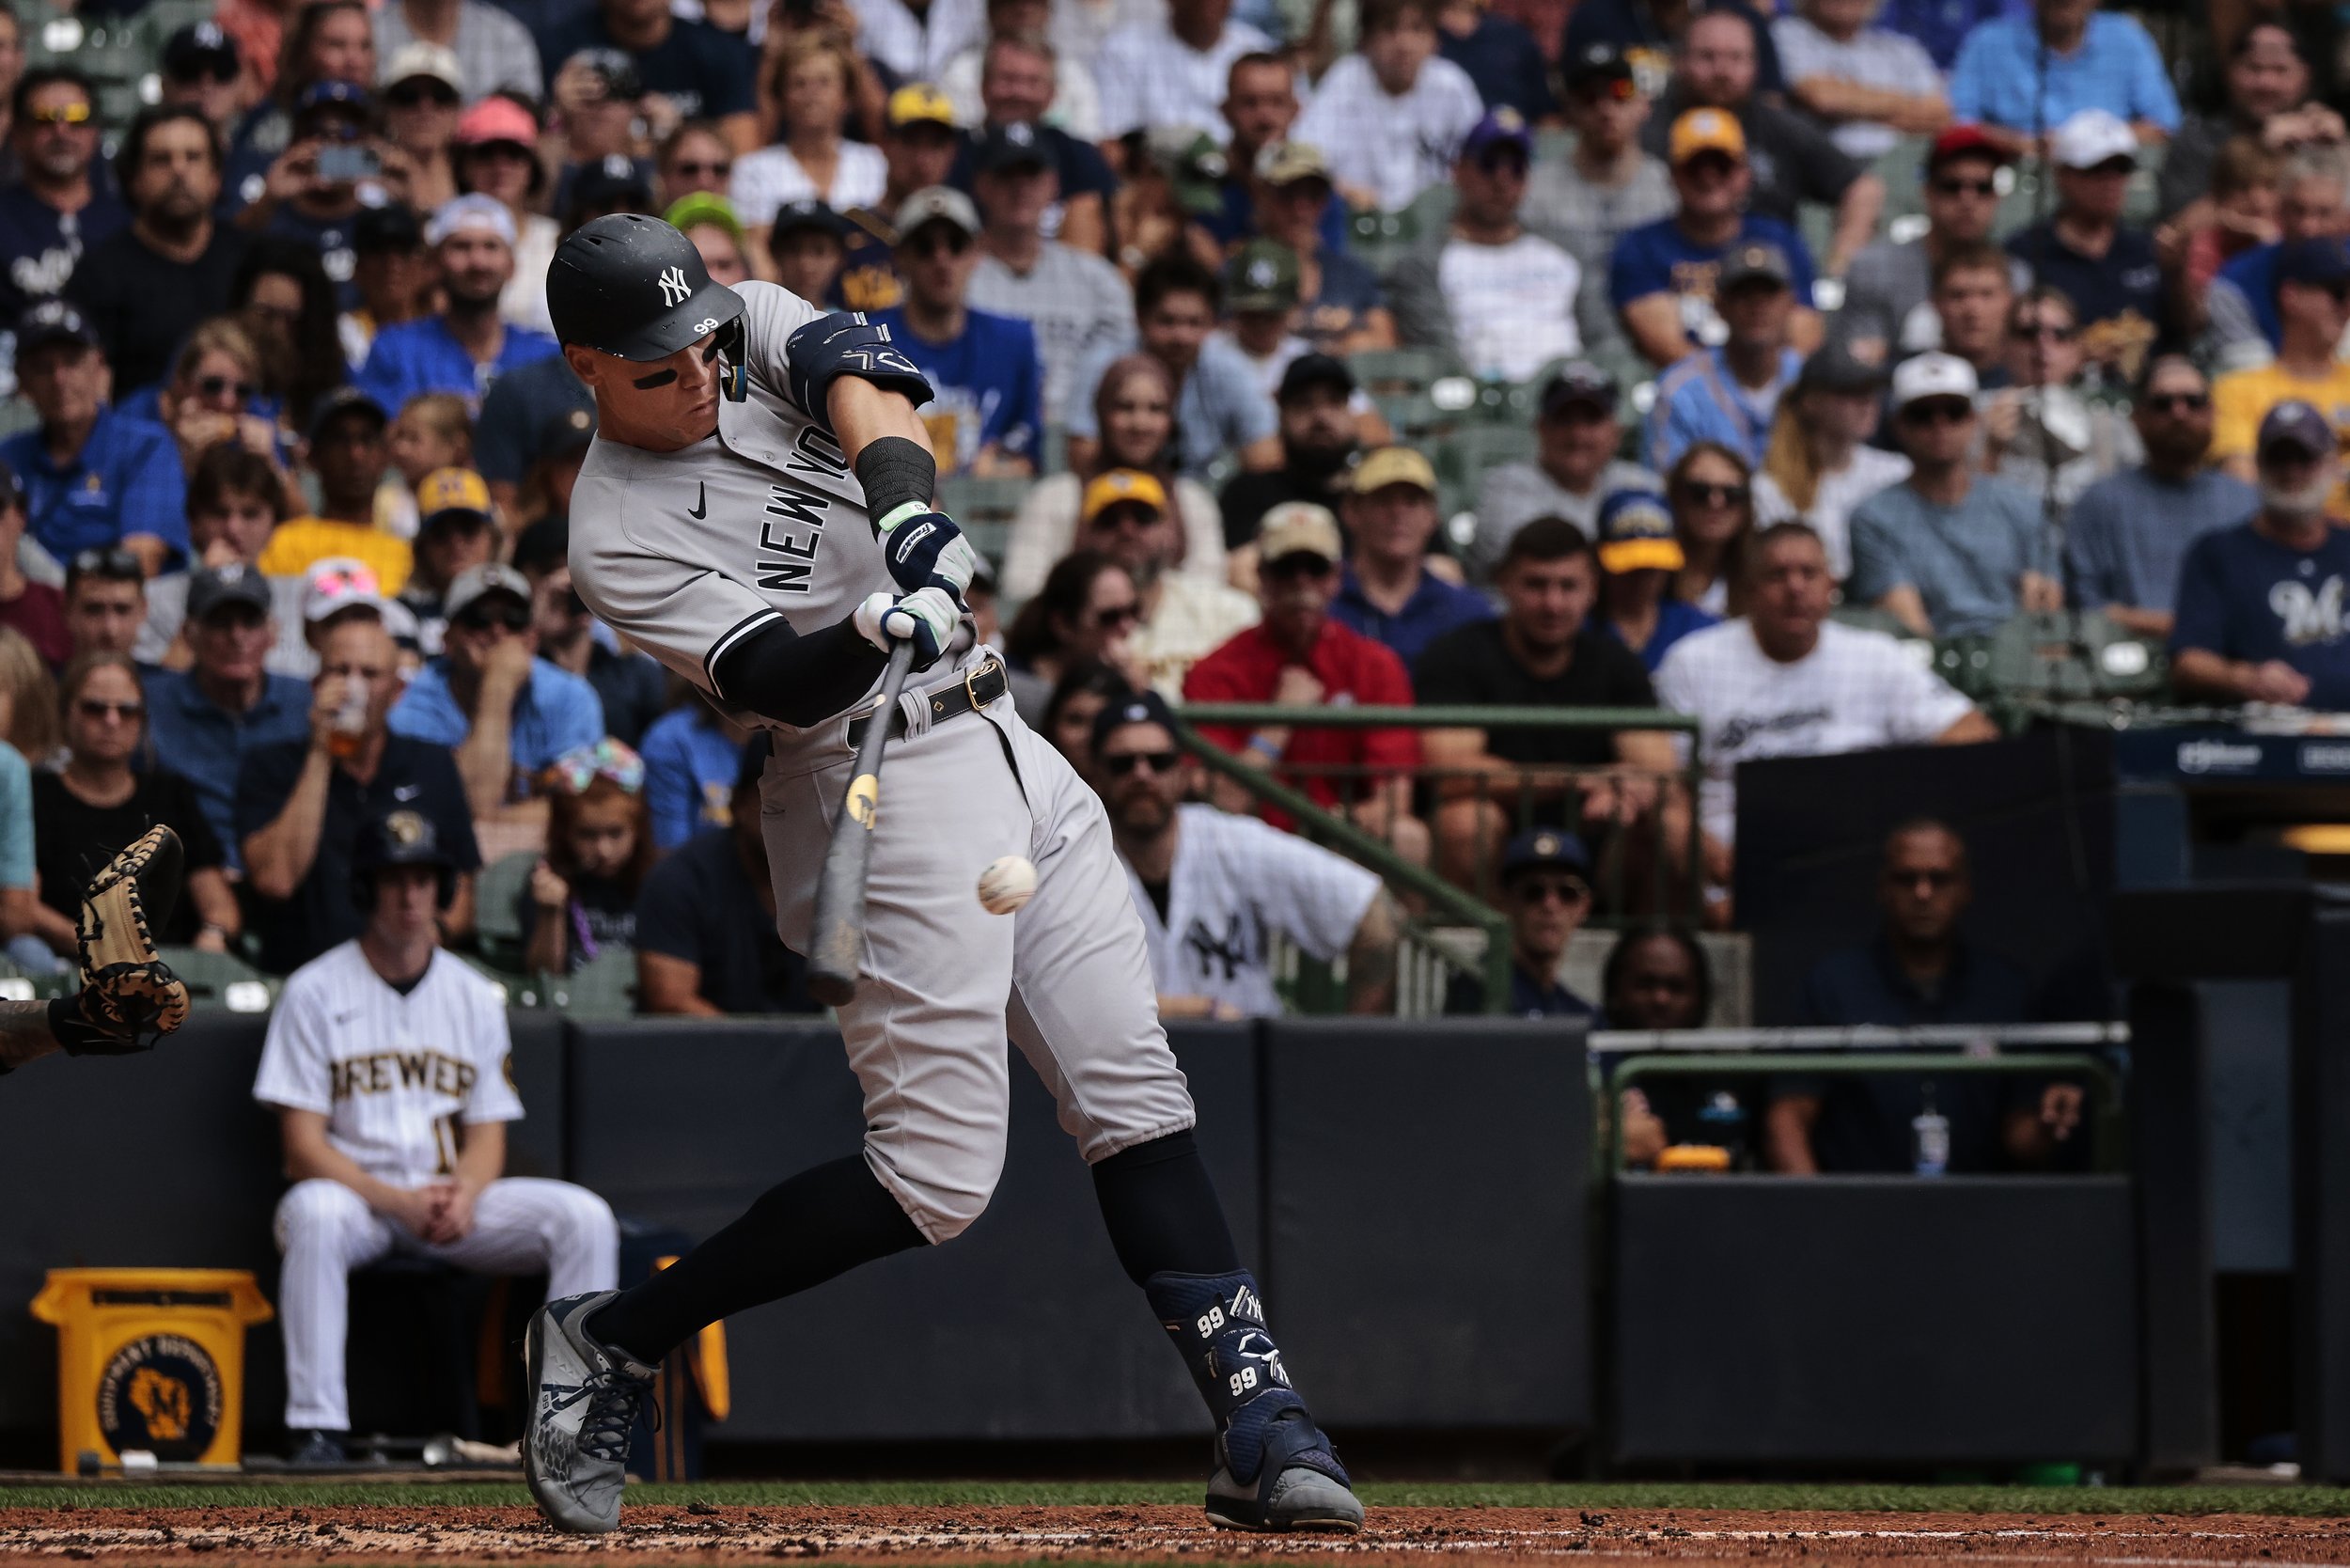   Aaron Judge (99) hits his 58th home run bat during a game between the Milwaukee Brewers and the New York Yankees at American Family Field on September 18, 2022 in Milwaukee, WI. (Mustafa Hussain for The New York Times)  